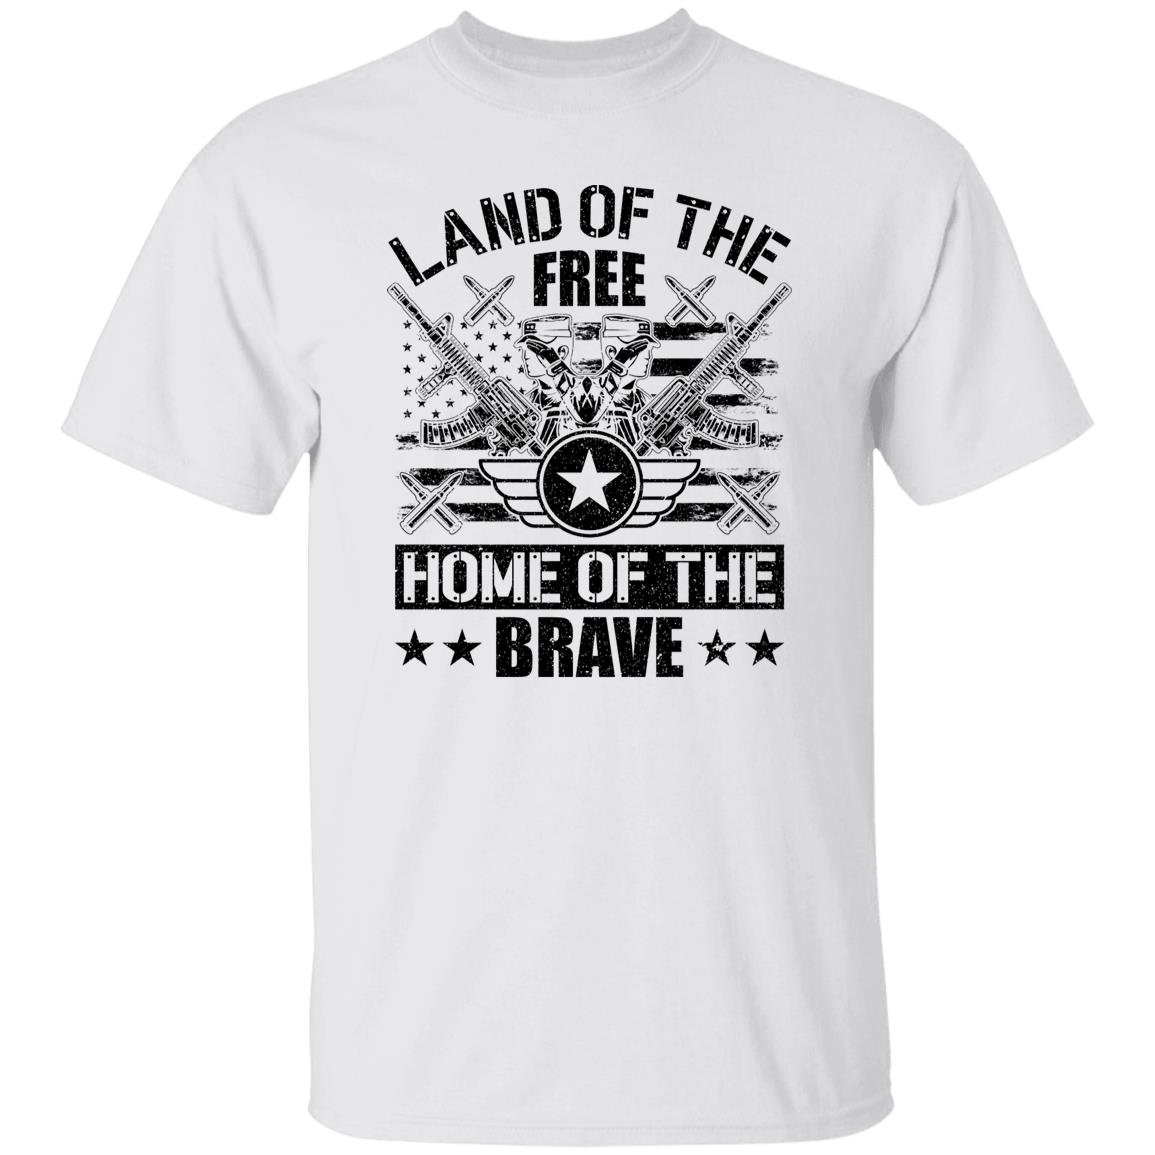 Land of the free home of the brave tee shirt